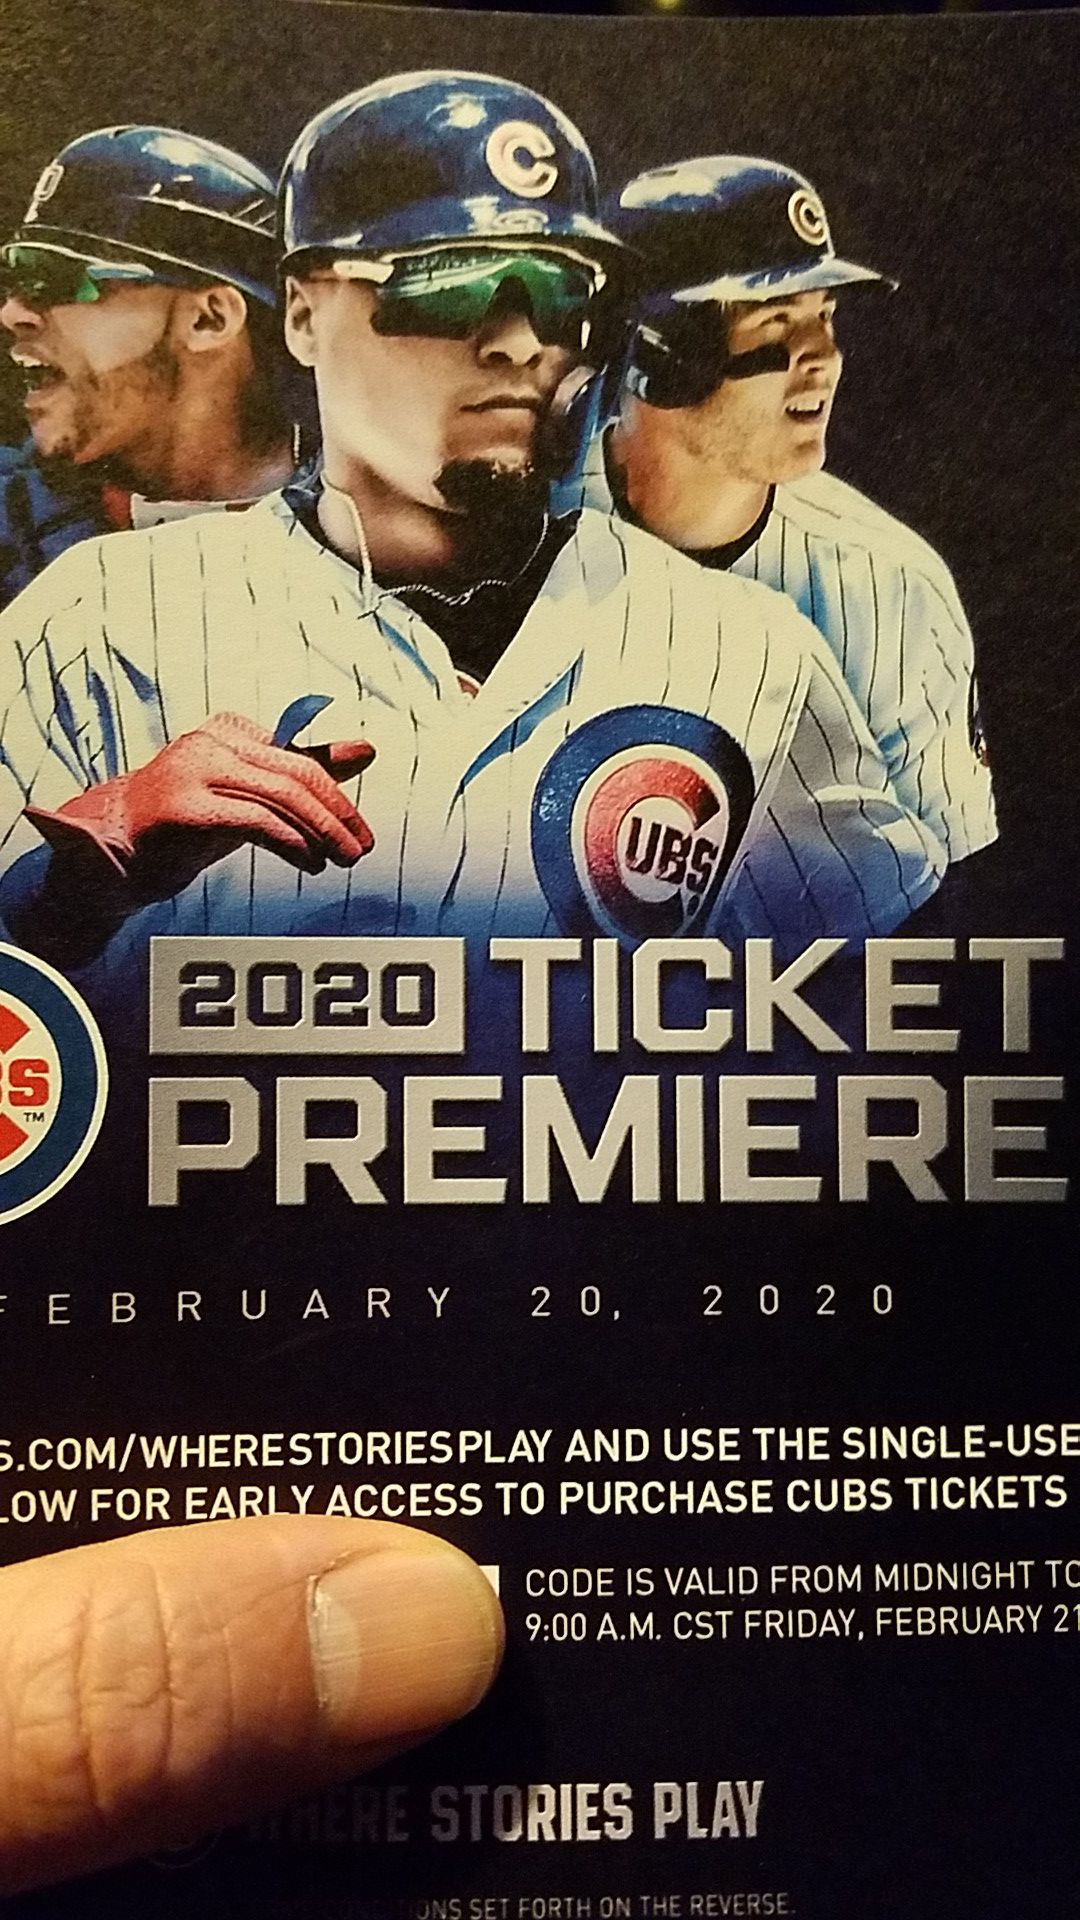 Early cubs tickets